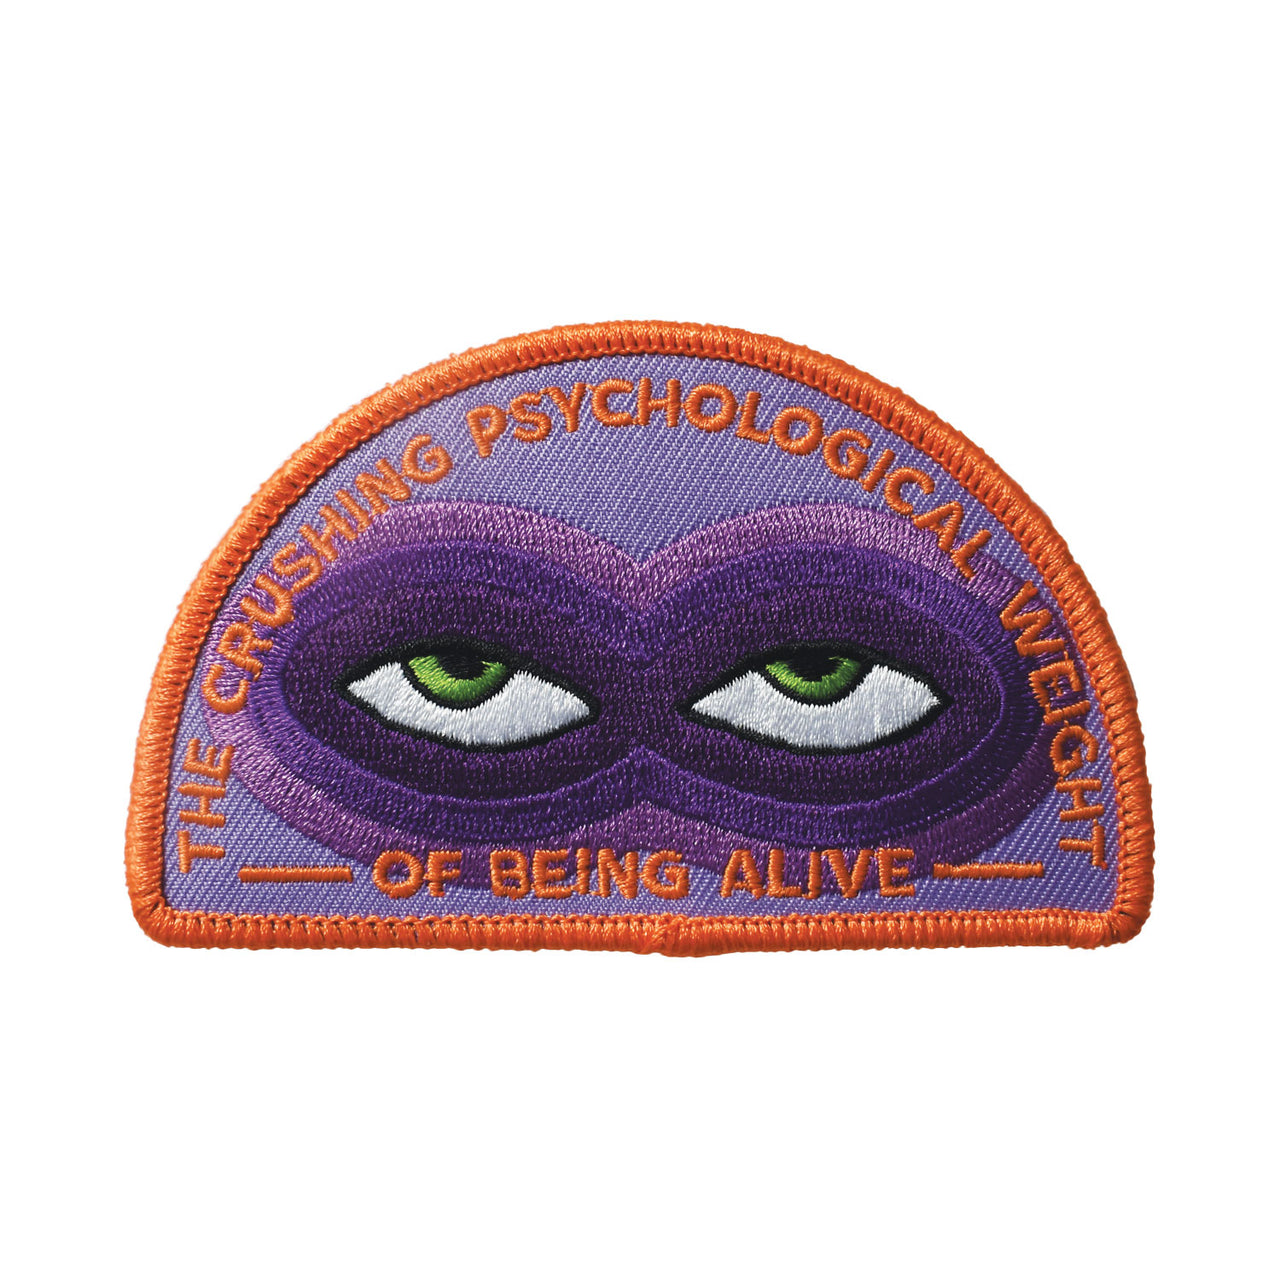 Crushing Psychological Weight (Iron-On Patch)